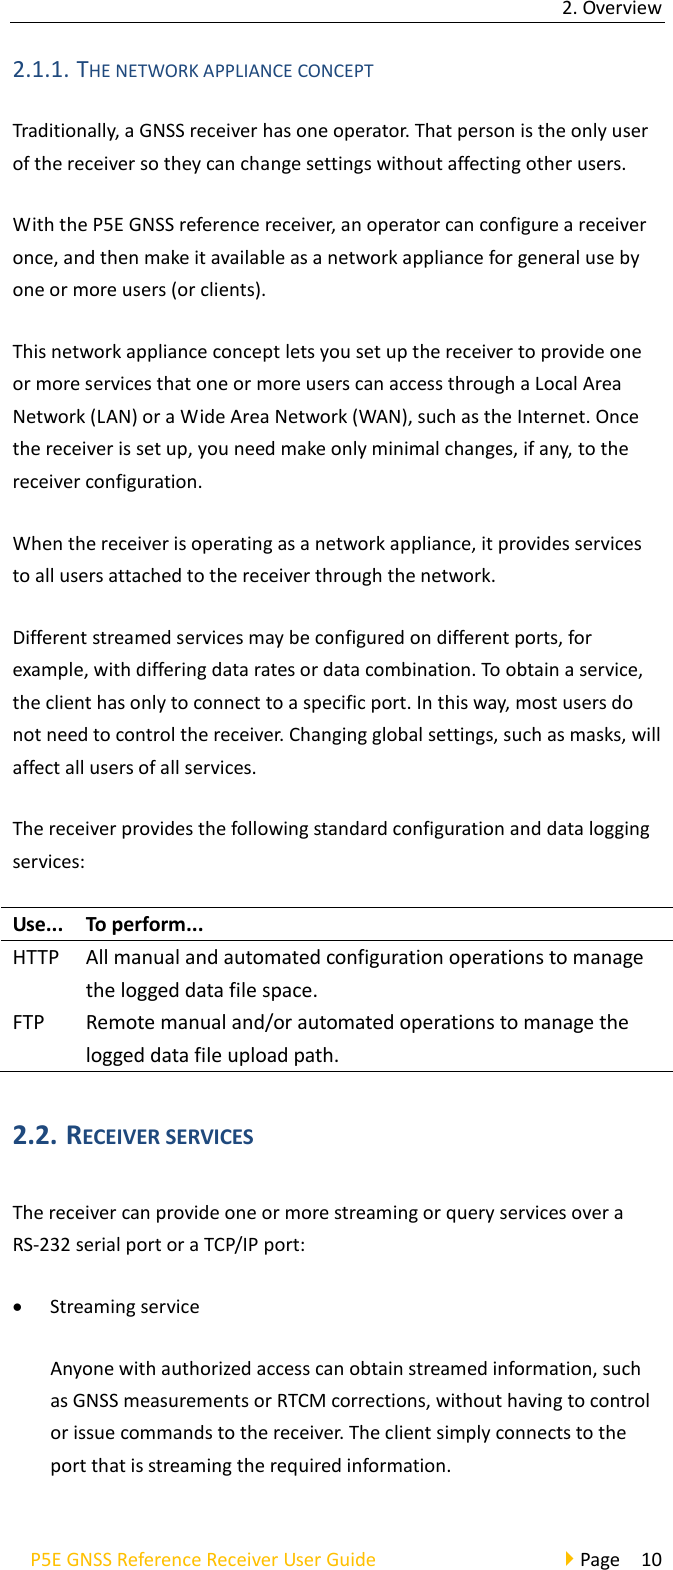 2. Overview P5E GNSS Reference Receiver User Guide                                     Page  10 2.1.1. THE NETWORK APPLIANCE CONCEPT Traditionally, a GNSS receiver has one operator. That person is the only user of the receiver so they can change settings without affecting other users. With the P5E GNSS reference receiver, an operator can configure a receiver once, and then make it available as a network appliance for general use by one or more users (or clients). This network appliance concept lets you set up the receiver to provide one or more services that one or more users can access through a Local Area Network (LAN) or a Wide Area Network (WAN), such as the Internet. Once the receiver is set up, you need make only minimal changes, if any, to the receiver configuration. When the receiver is operating as a network appliance, it provides services to all users attached to the receiver through the network. Different streamed services may be configured on different ports, for example, with differing data rates or data combination. To obtain a service, the client has only to connect to a specific port. In this way, most users do not need to control the receiver. Changing global settings, such as masks, will affect all users of all services. The receiver provides the following standard configuration and data logging services: Use... To perform... HTTP All manual and automated configuration operations to manage the logged data file space. FTP Remote manual and/or automated operations to manage the logged data file upload path. 2.2. RECEIVER SERVICES The receiver can provide one or more streaming or query services over a RS-232 serial port or a TCP/IP port: • Streaming service Anyone with authorized access can obtain streamed information, such as GNSS measurements or RTCM corrections, without having to control or issue commands to the receiver. The client simply connects to the port that is streaming the required information. 